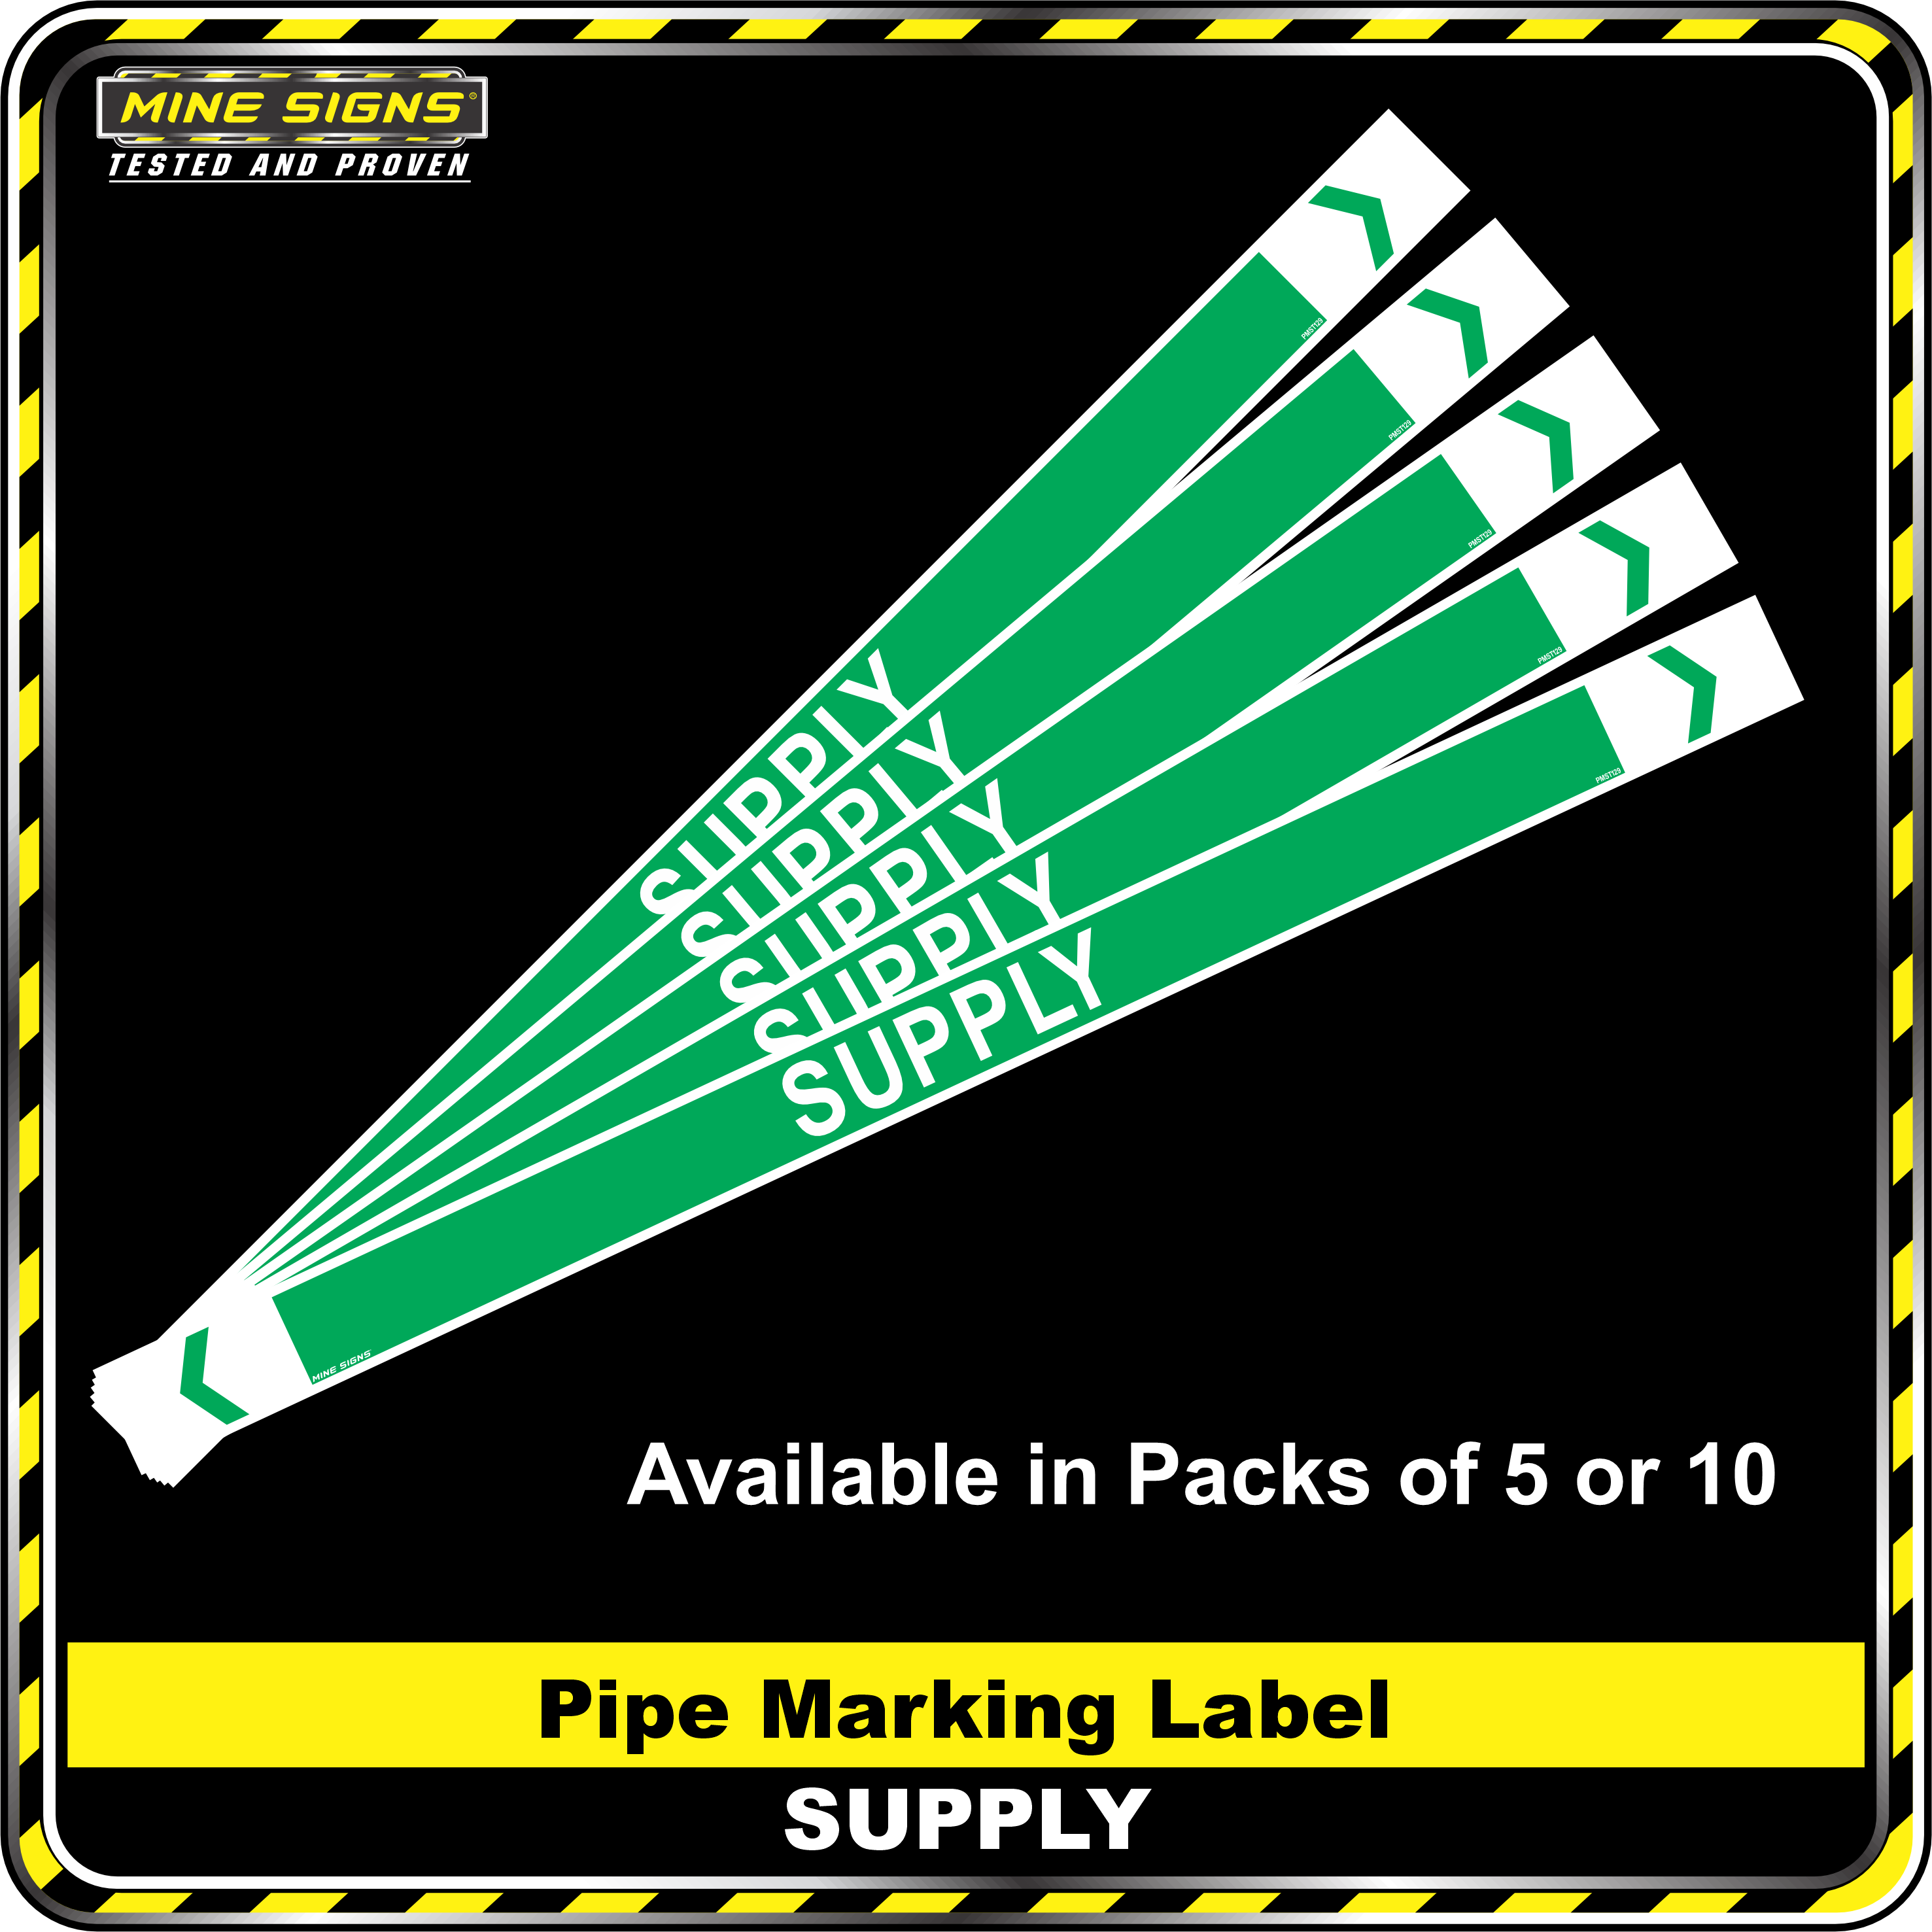 Pipe Marking Label - Supply MS - Pipe Markers - Supply